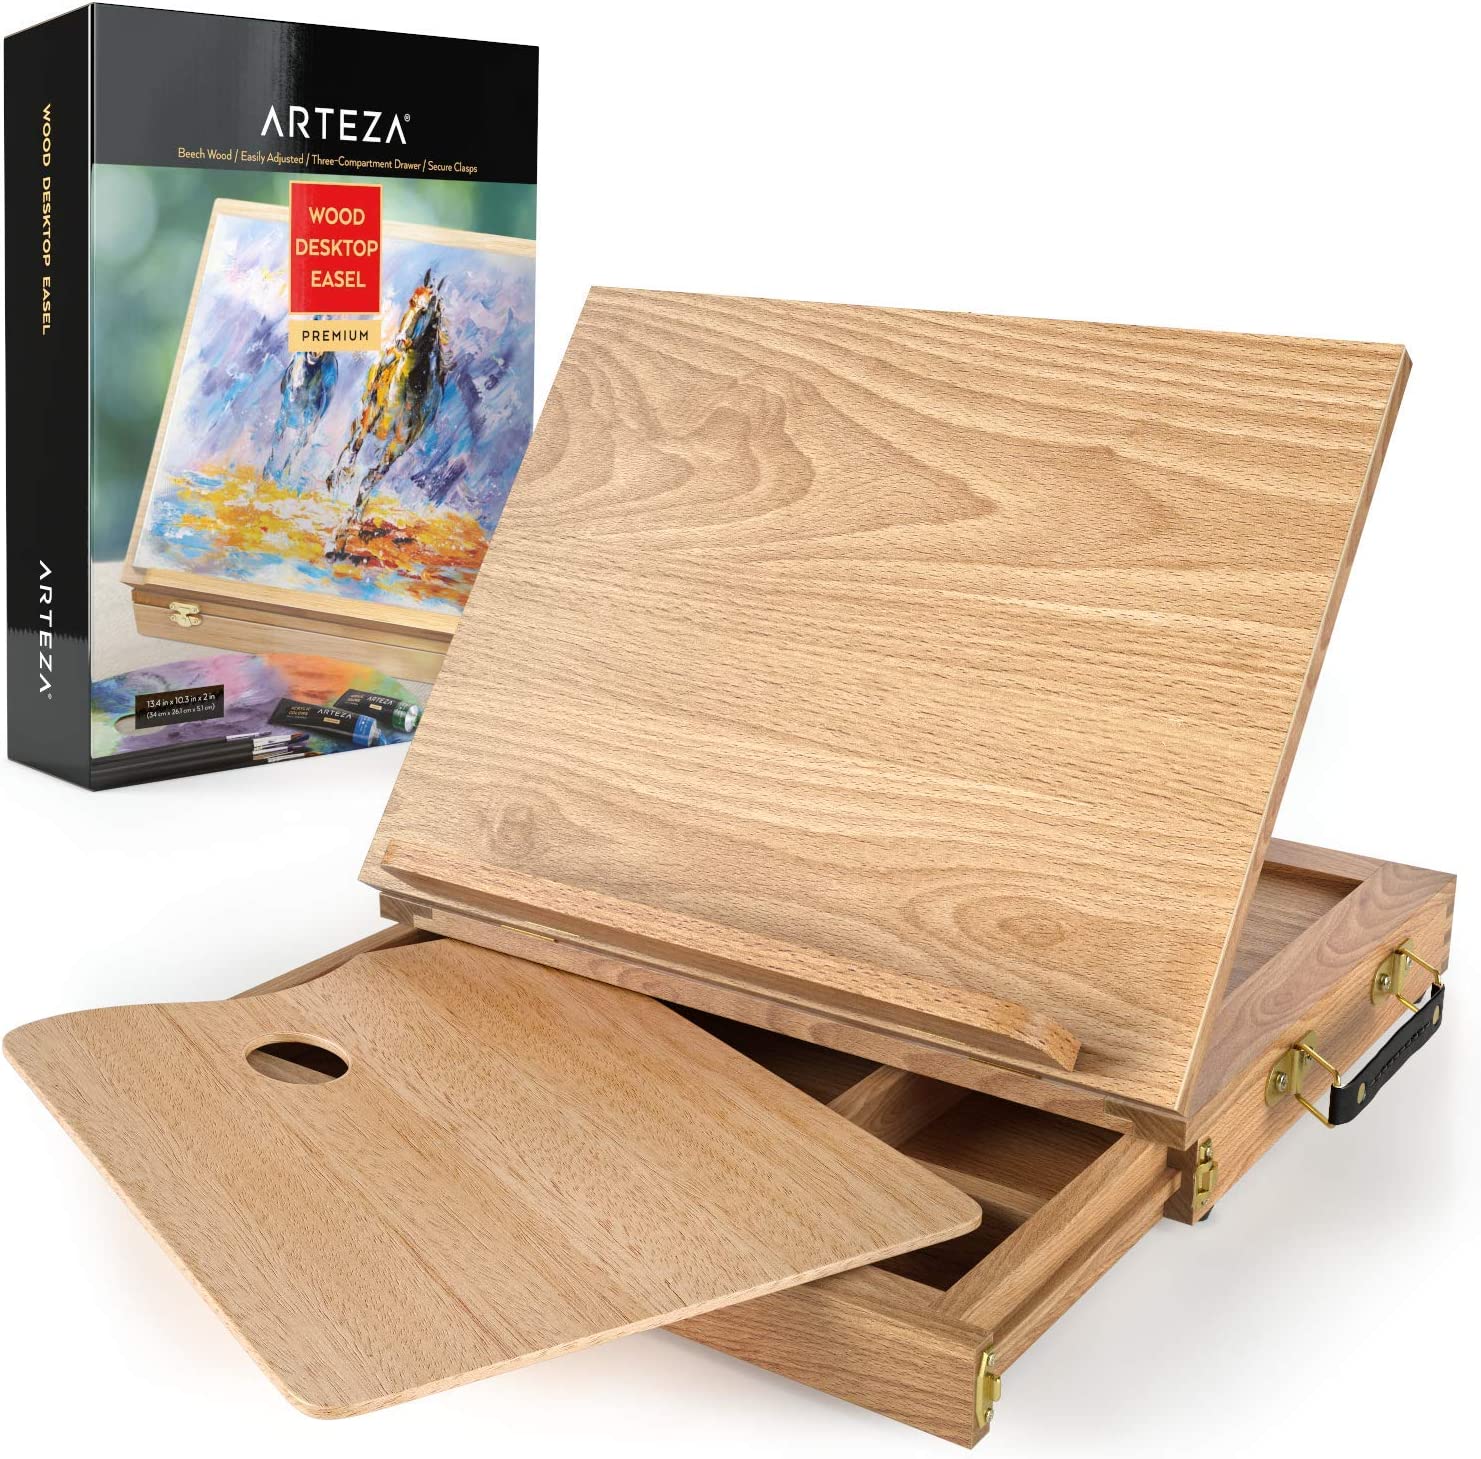 Arteza Tabletop Easel, 13.4 x 10.3 x 2 Inches, Portable Beechwood Easel Box with 3-Compartment Drawer and Wooden Palette, Art Supplies Storage for Professional Artists and Hobby Painters